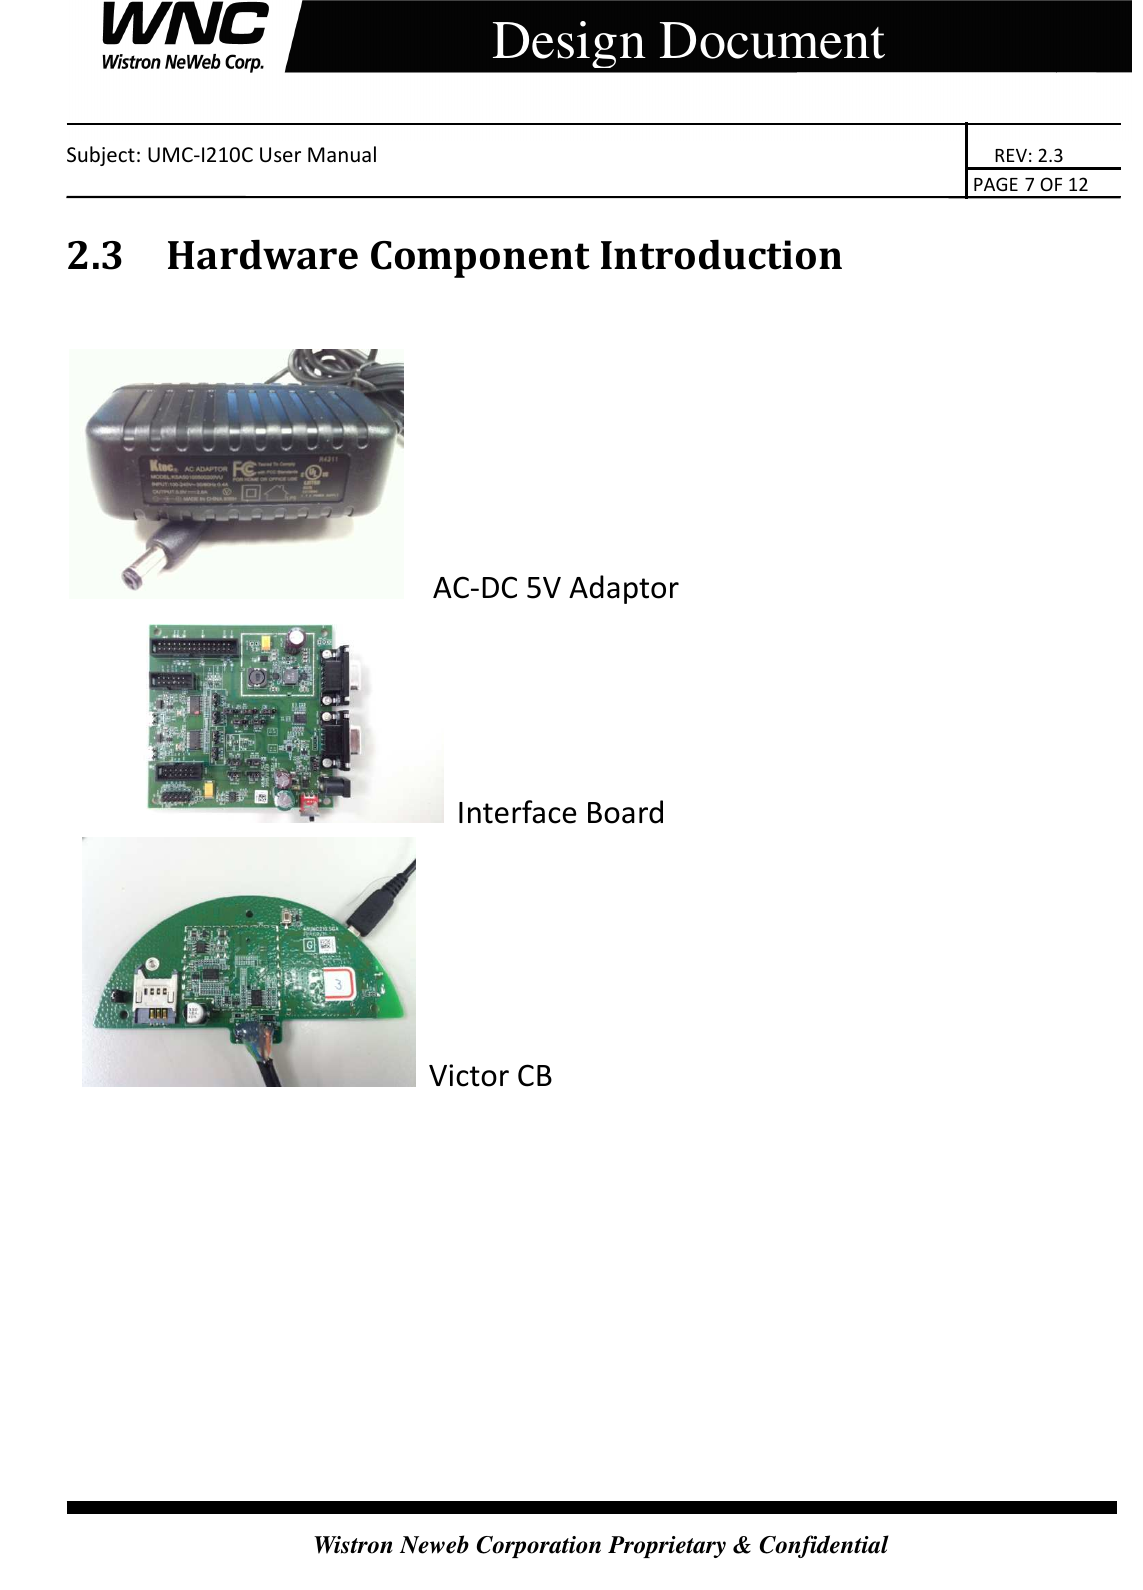    Subject: UMC-I210C User Manual                                                                       REV: 2.3                                                                                                                                                                               PAGE 7 OF 12  Wistron Neweb Corporation Proprietary &amp; Confidential     Design Document 2.3 Hardware Component Introduction    AC-DC 5V Adaptor  Interface Board     Victor CB        